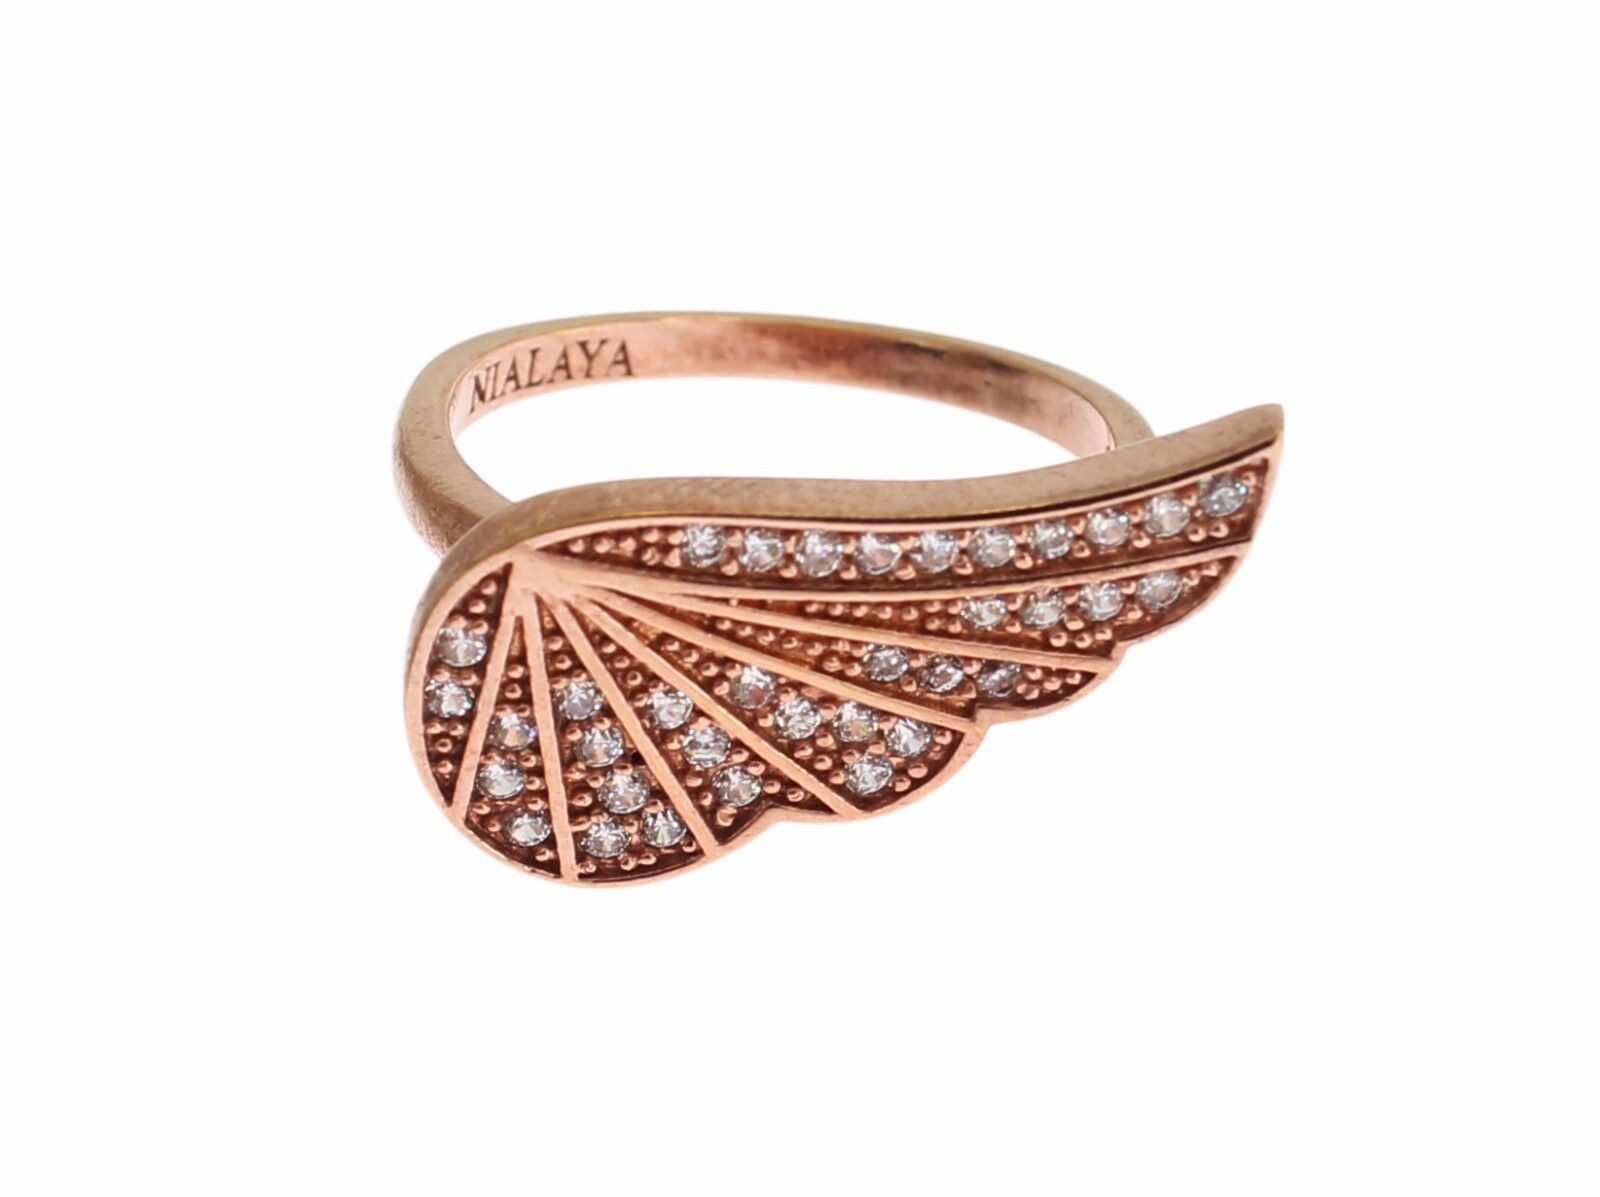 Nialaya Pink Gold 925 Silver Womens Clear CZ Ring GENUINE AUTHENTIC BRAND LLC